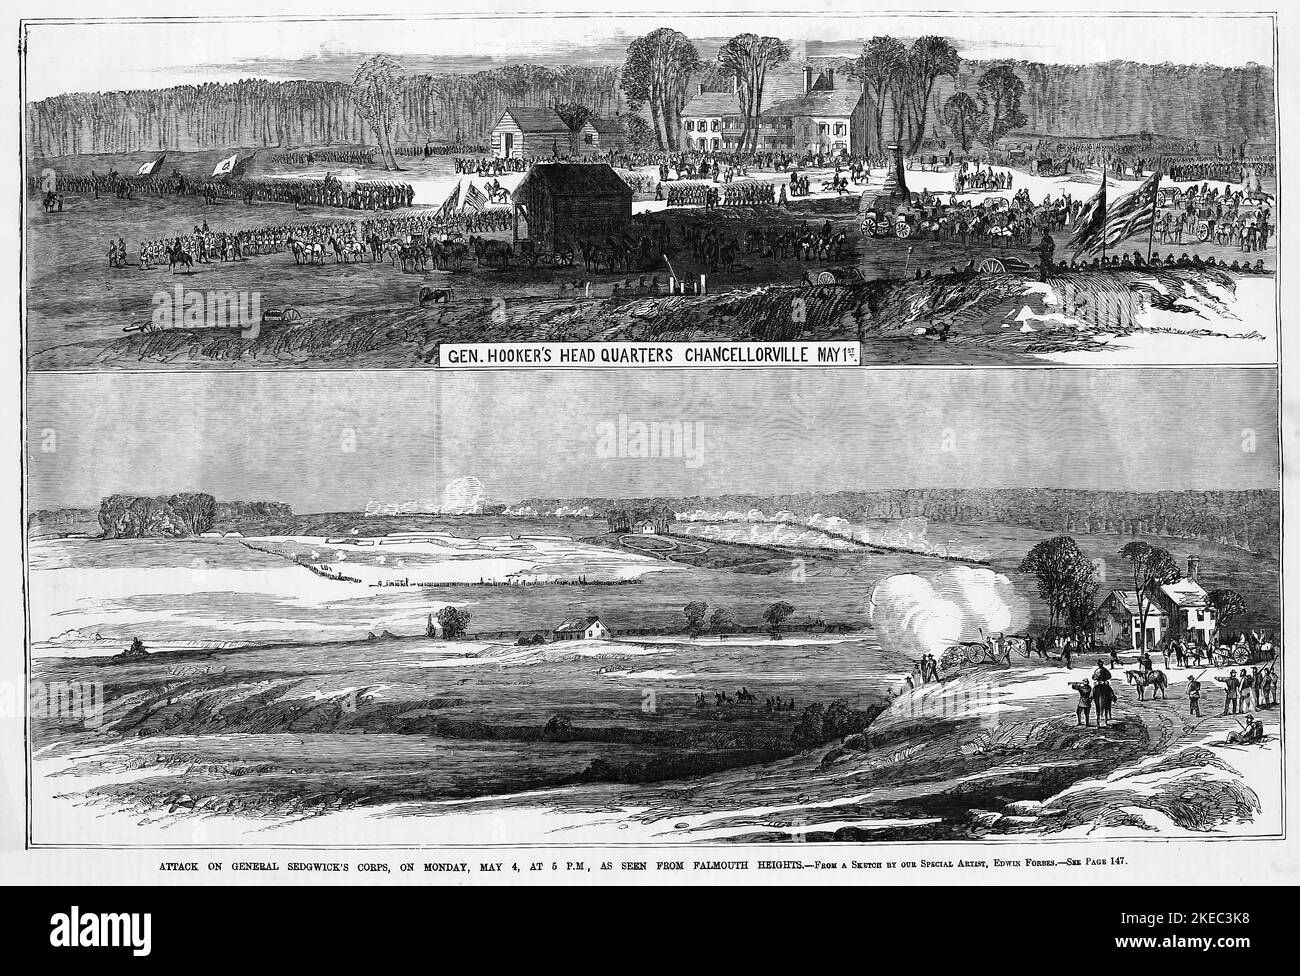 General Joseph Hooker's headquarters, Chancellorville, May 1st, 1863 - Attack on General John Sedgwick's Corps, on Monday, May 4th, at 5 P. M., as seen from Falmouth Heights. Battle of Chancellorsville. 19th century American Civil War illustration from Frank Leslie's Illustrated Newspaper Stock Photo